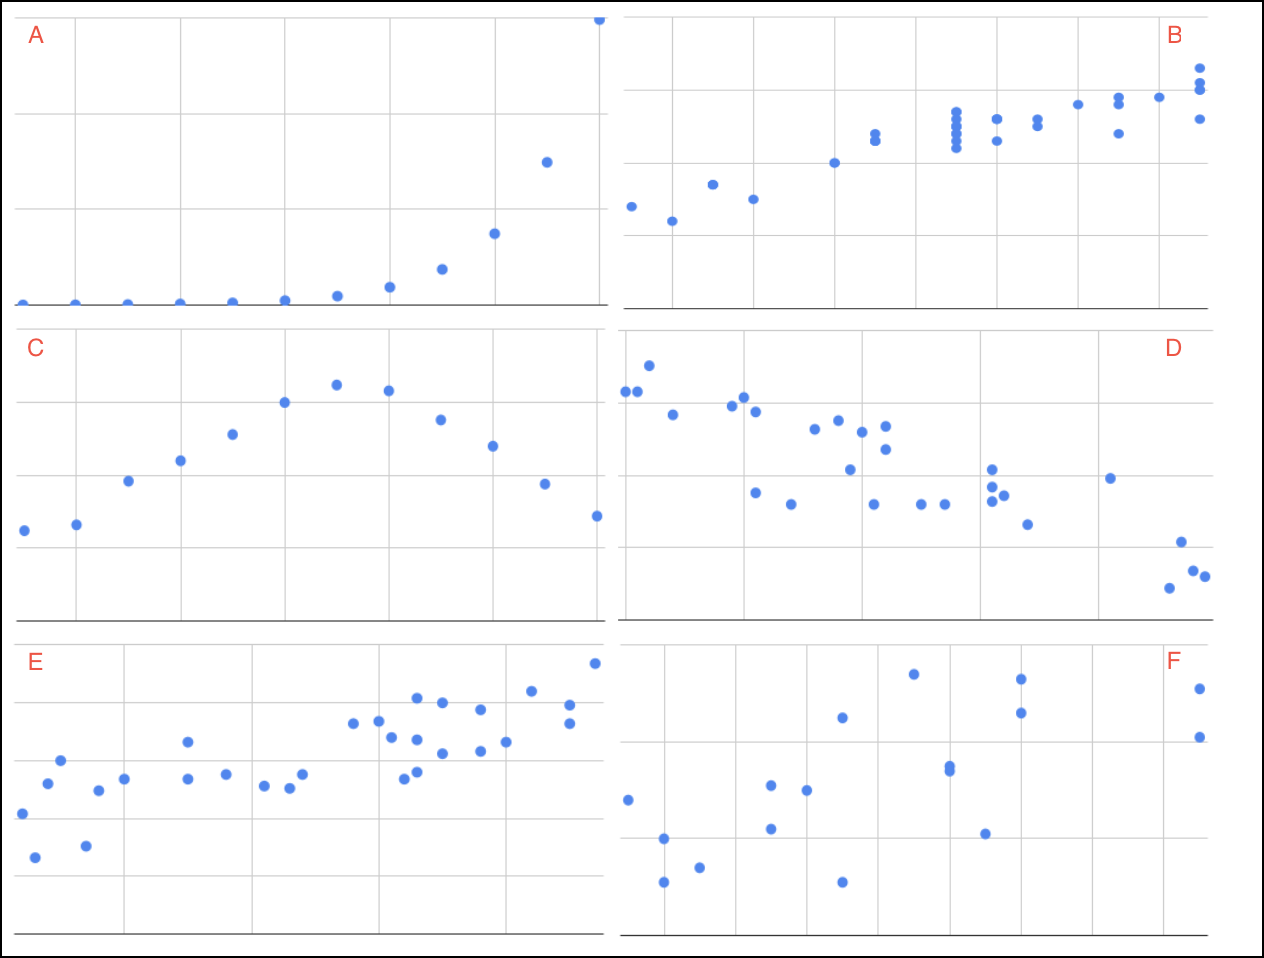 Six scatterplots labeled A through F.